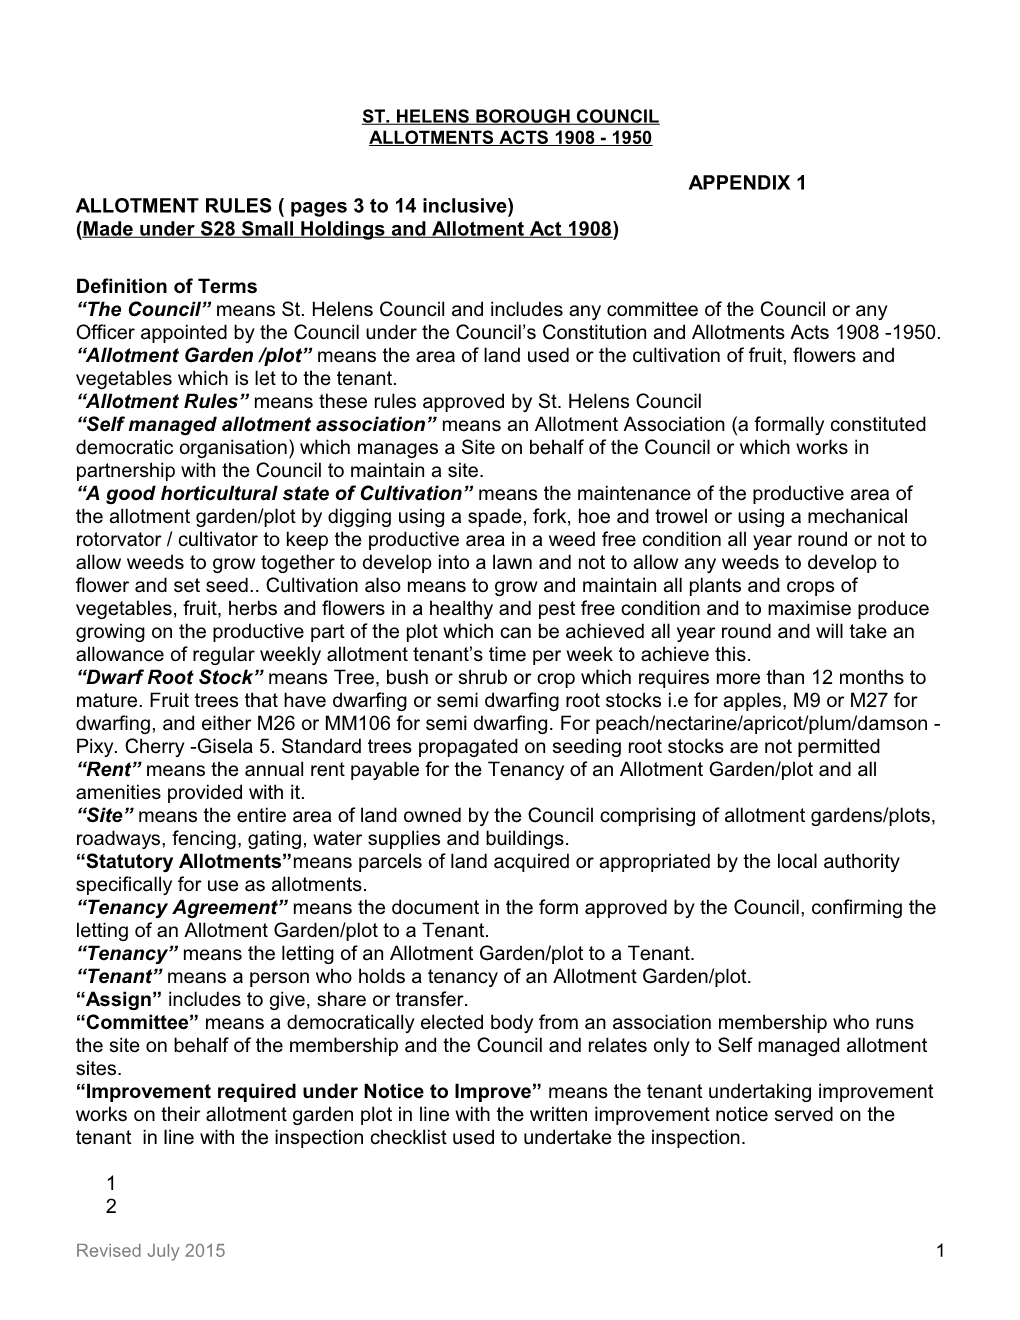 Tenancy Agreement and Allotment Rules